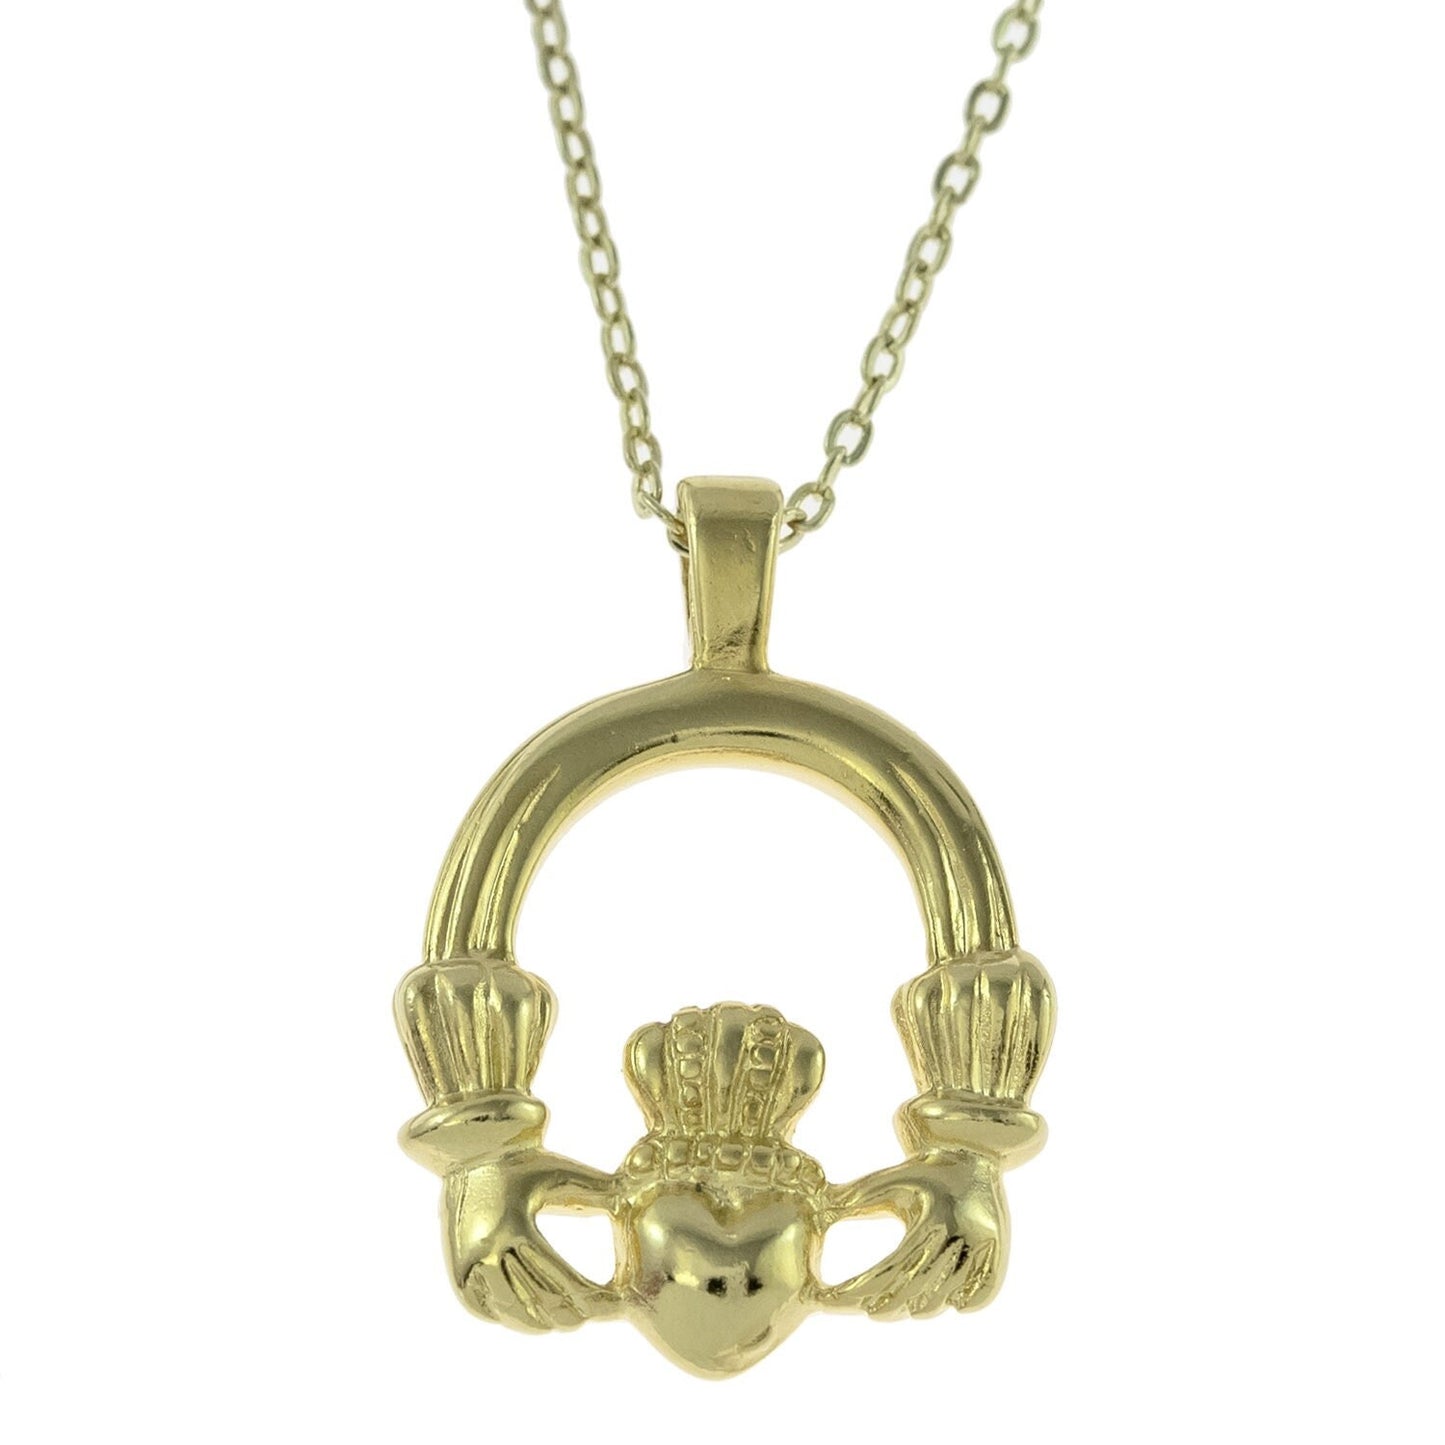 Vintage Claddagh Necklace Pendant Antique 18k Gold Made in the USA N1722 - Limited Stock - Never Worn